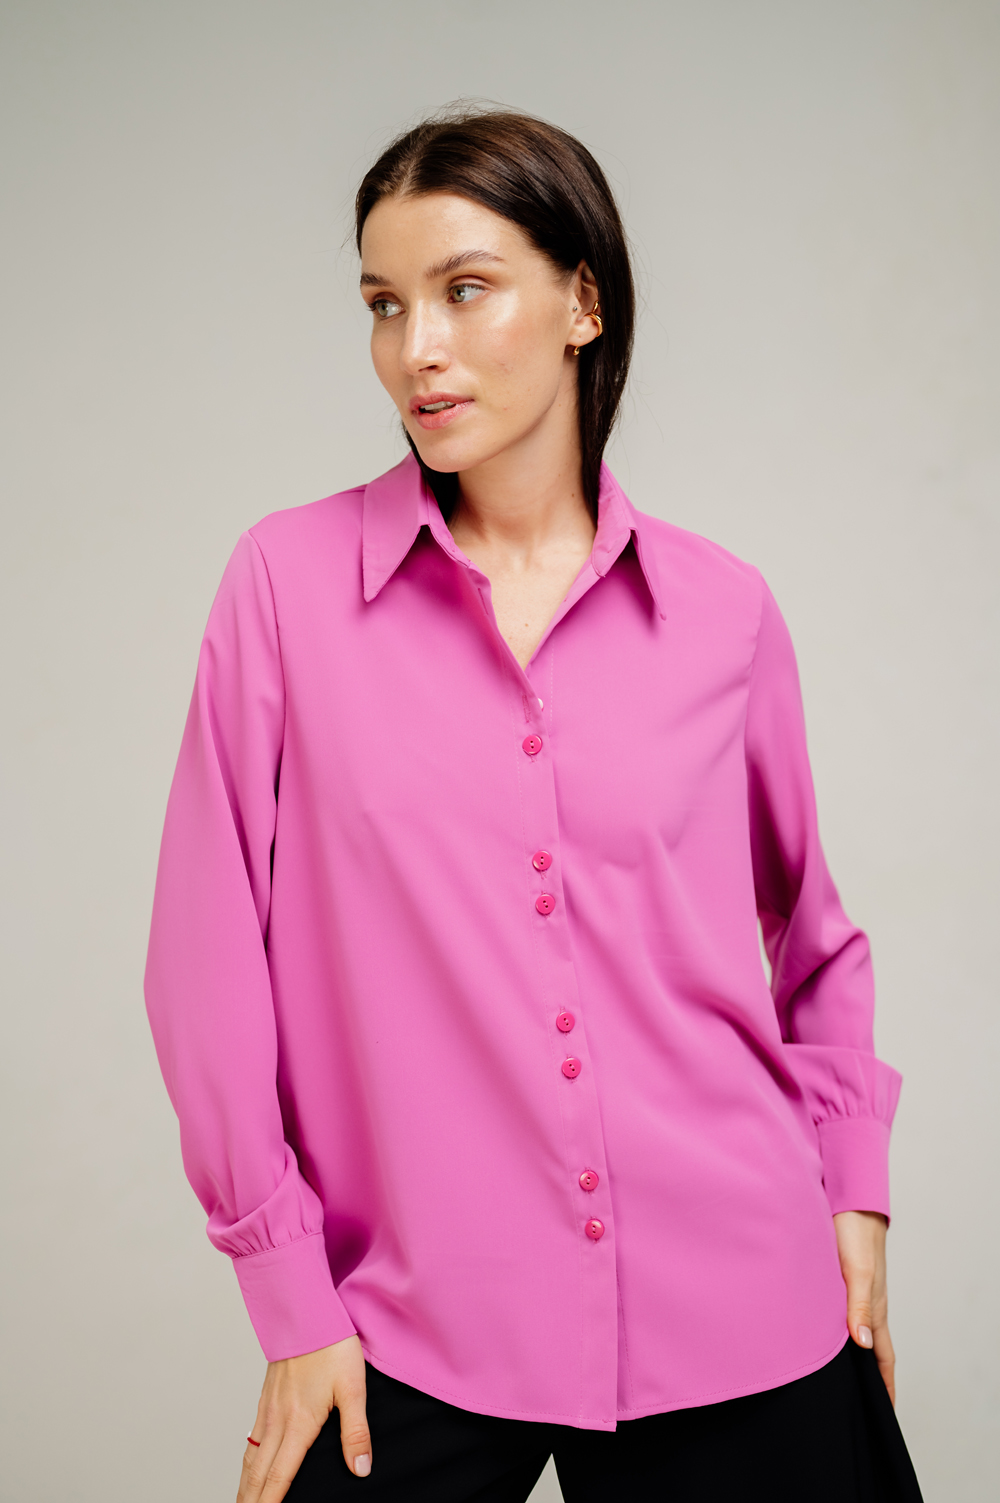 Pink blouse in a romantic style